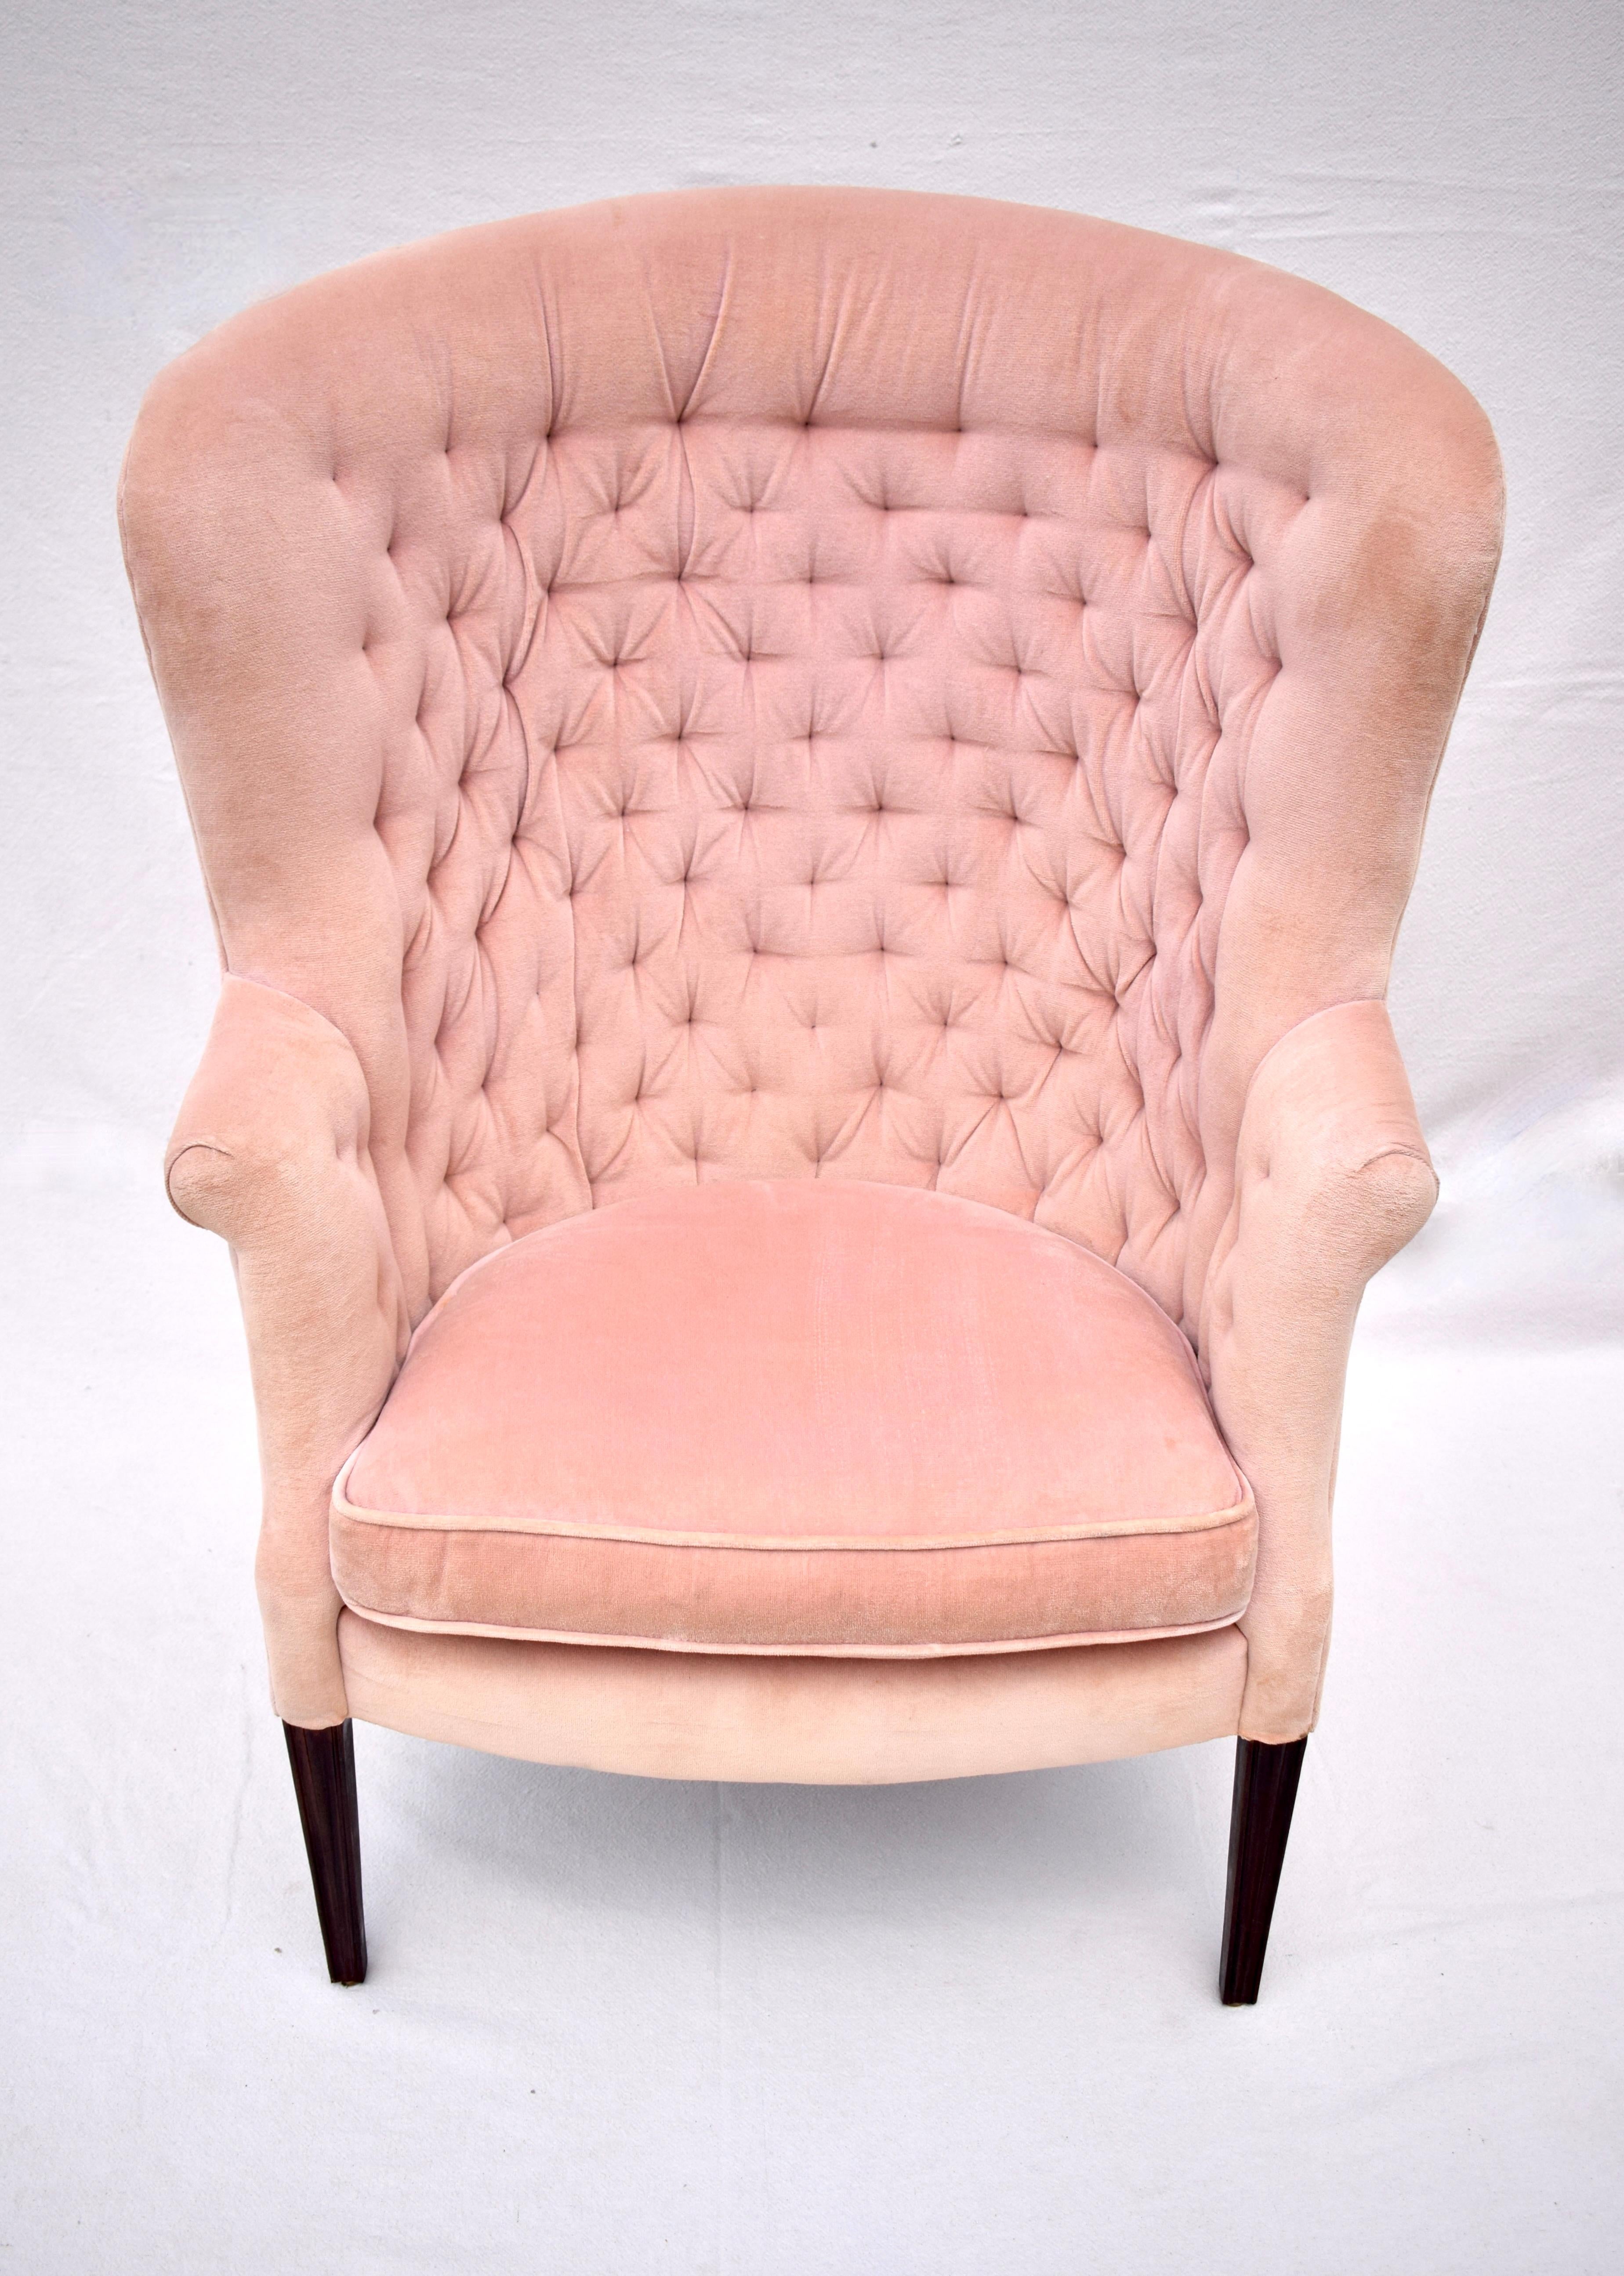 Sumptuous Edwardian Hepplewhite style Mahogany wing chair featuring curved back, scroll arms, tapered & splay legs upholstered in plush peach velvet. Marvelous tufted detailing. All original well maintained & professionally cleaned. seat: 21